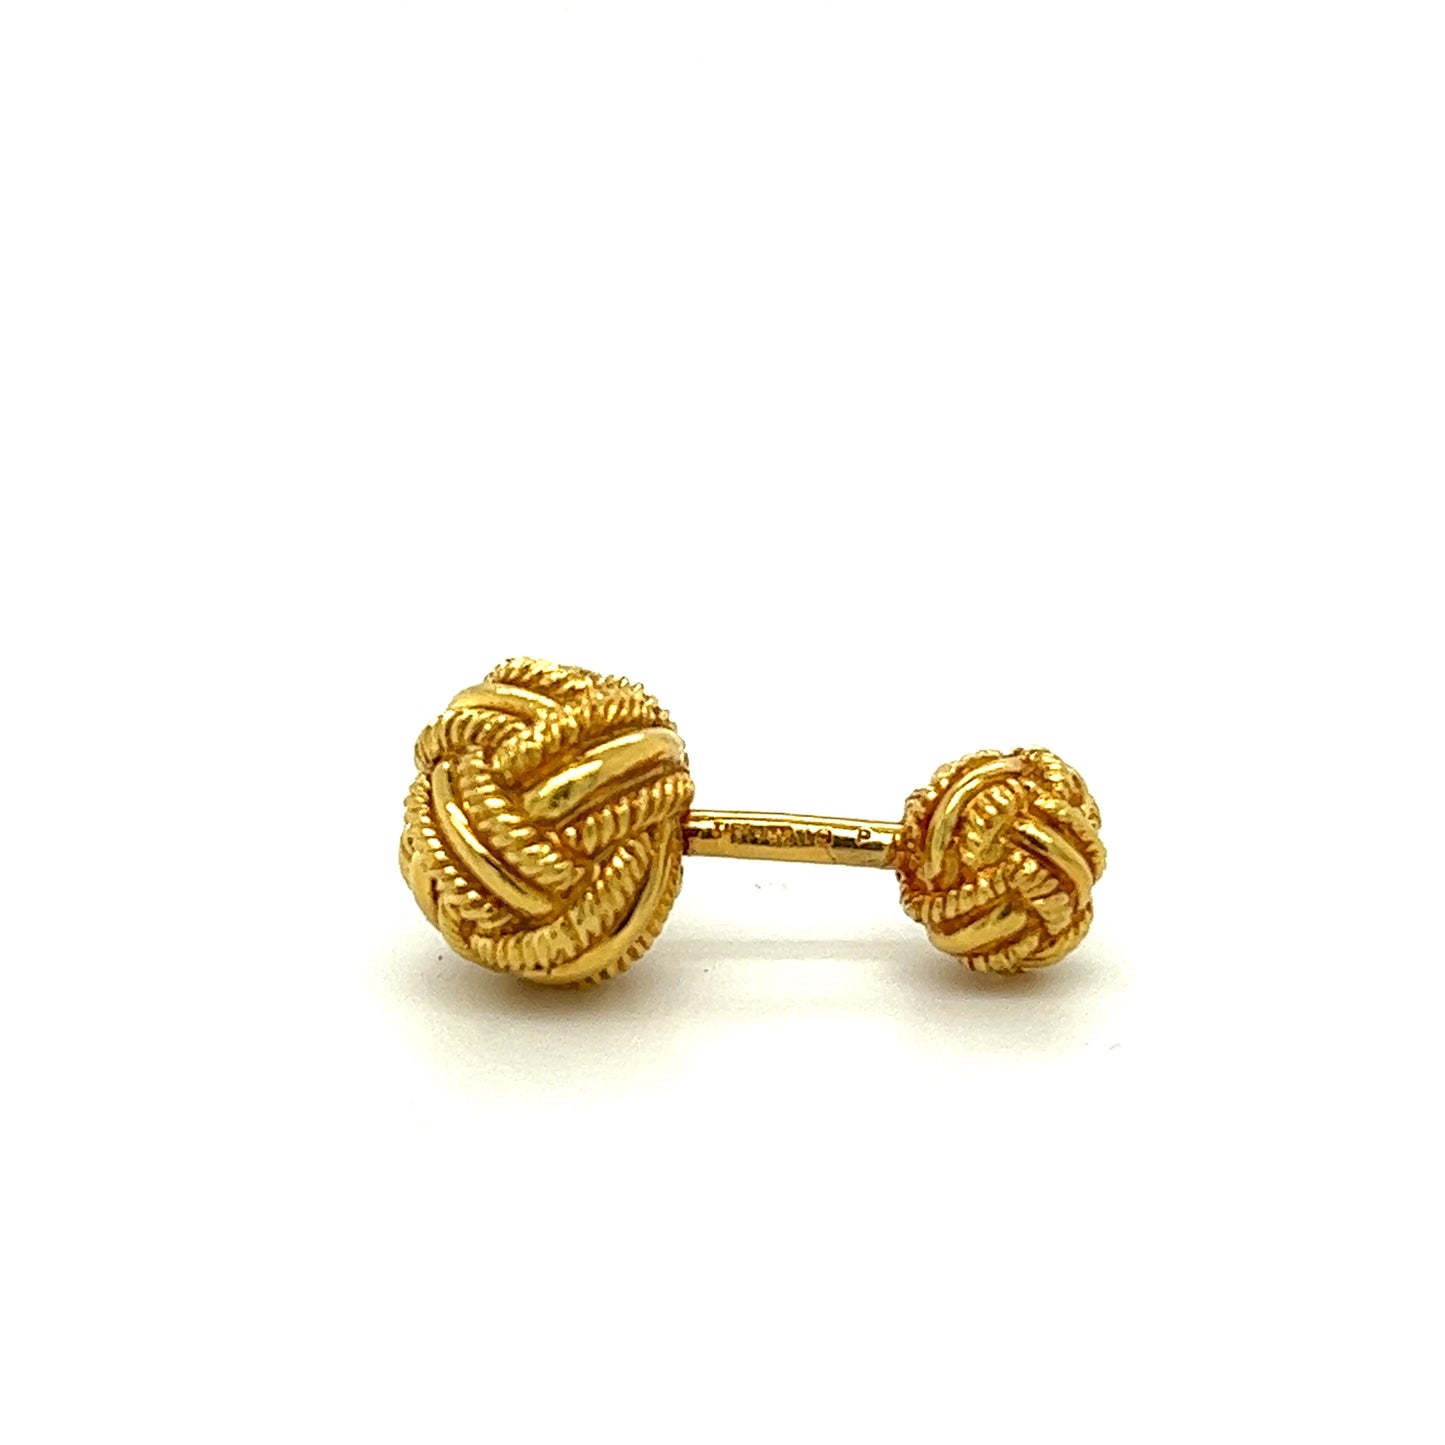 Tiffany & Co Schlumberger Woven Knot Cufflinks in 18k Yellow Gold